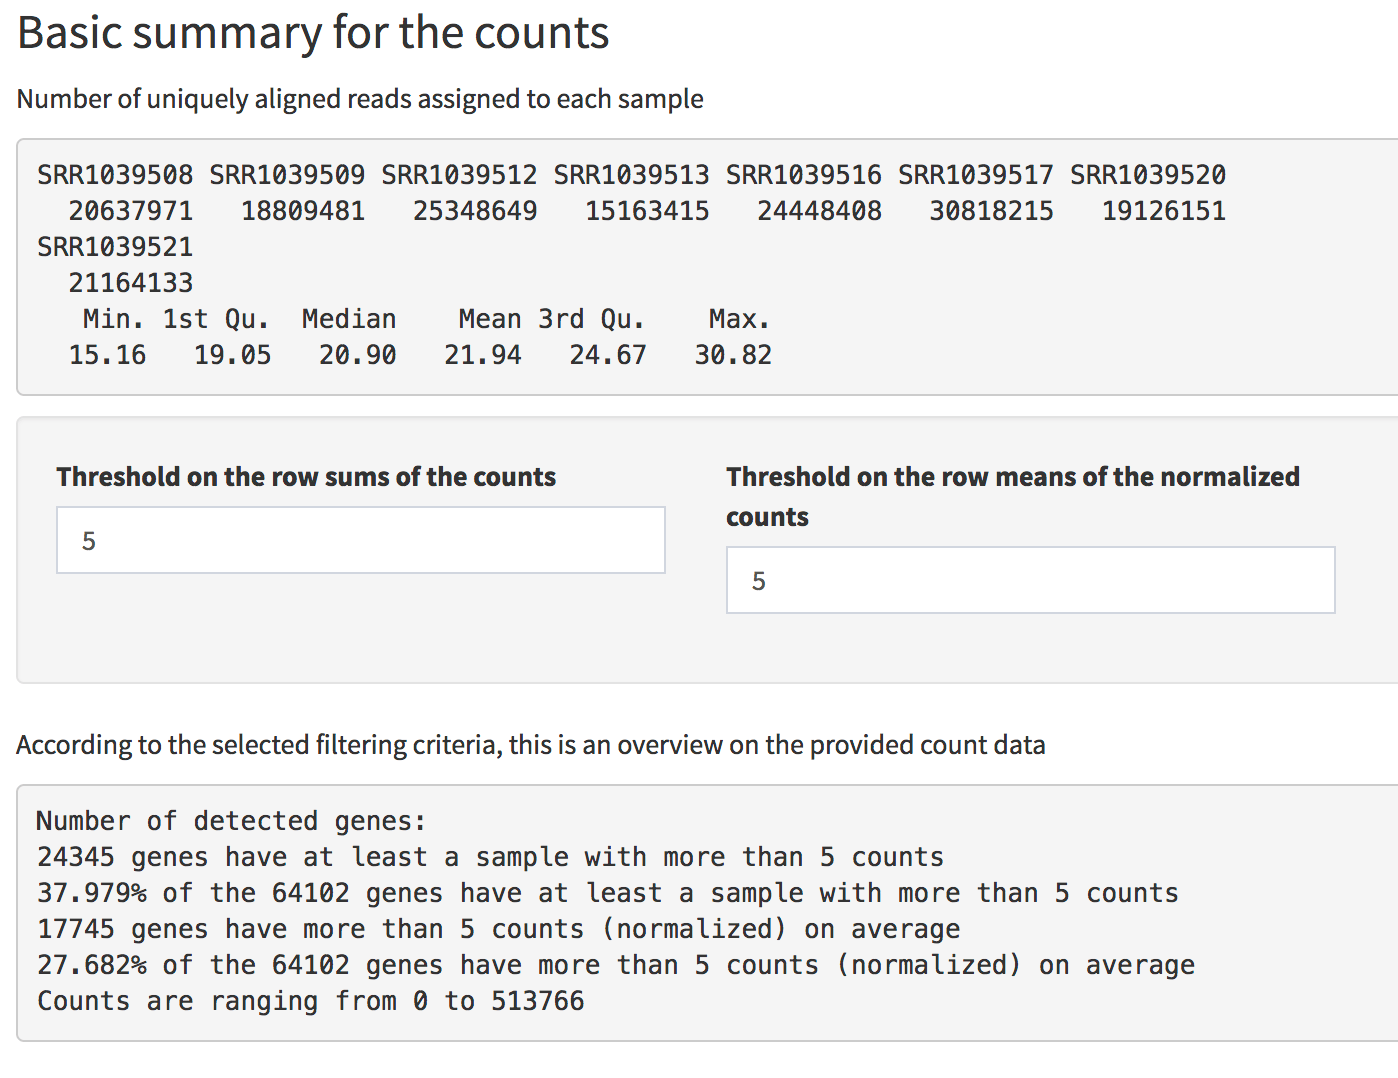 Screenshot of the Basic Summary of the counts in the Data Overview panel. General information are provided, together with an overview on detected genes according to different filtering criteria.